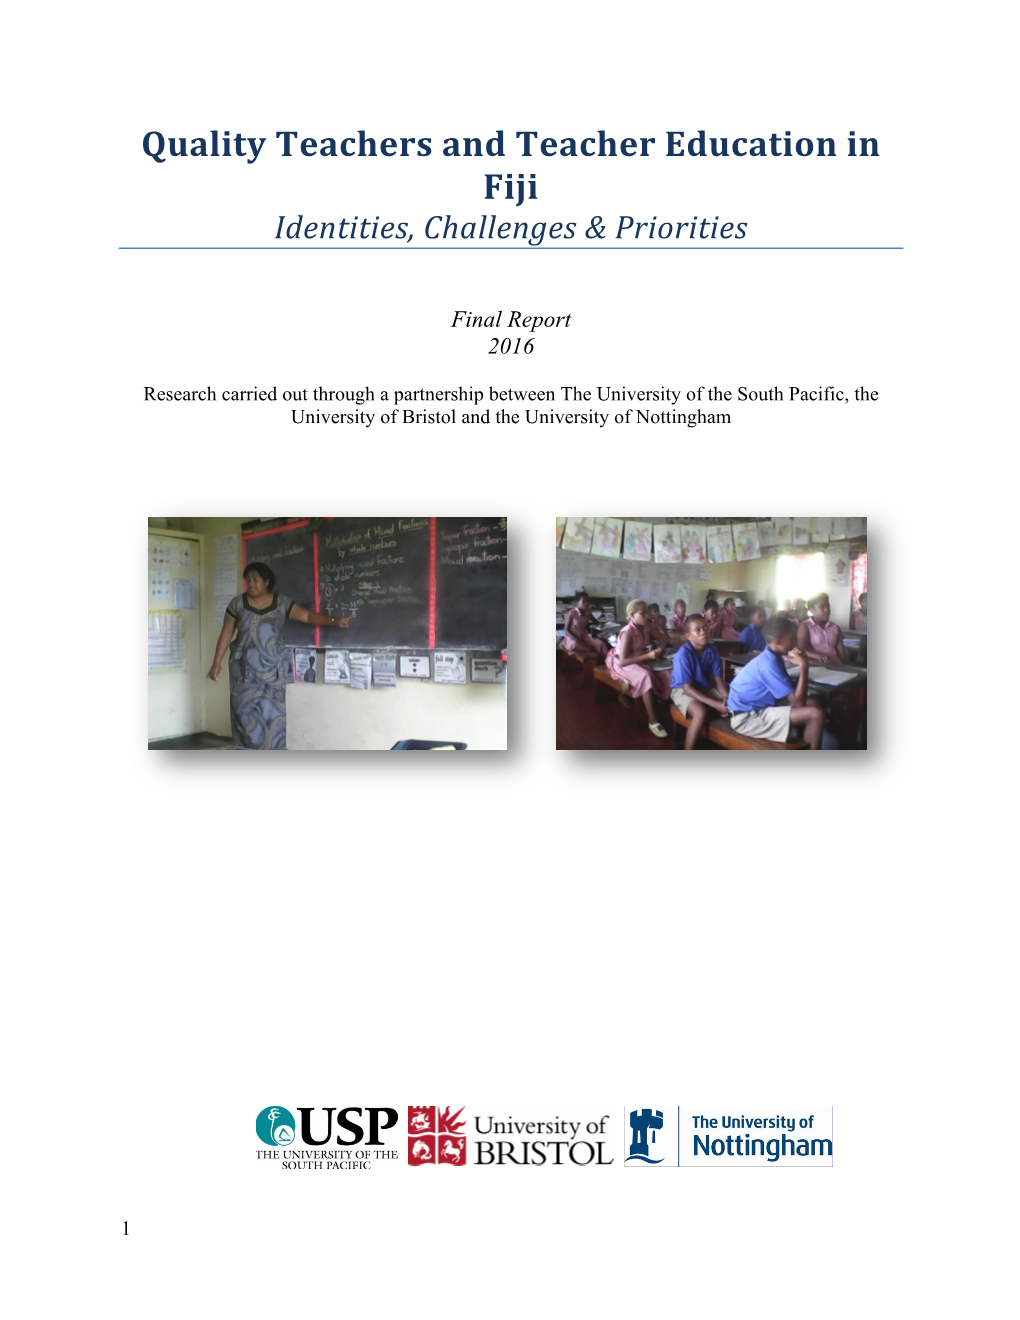 Quality Teachers and Teacher Education in Fiji Identities, Challenges & Priorities